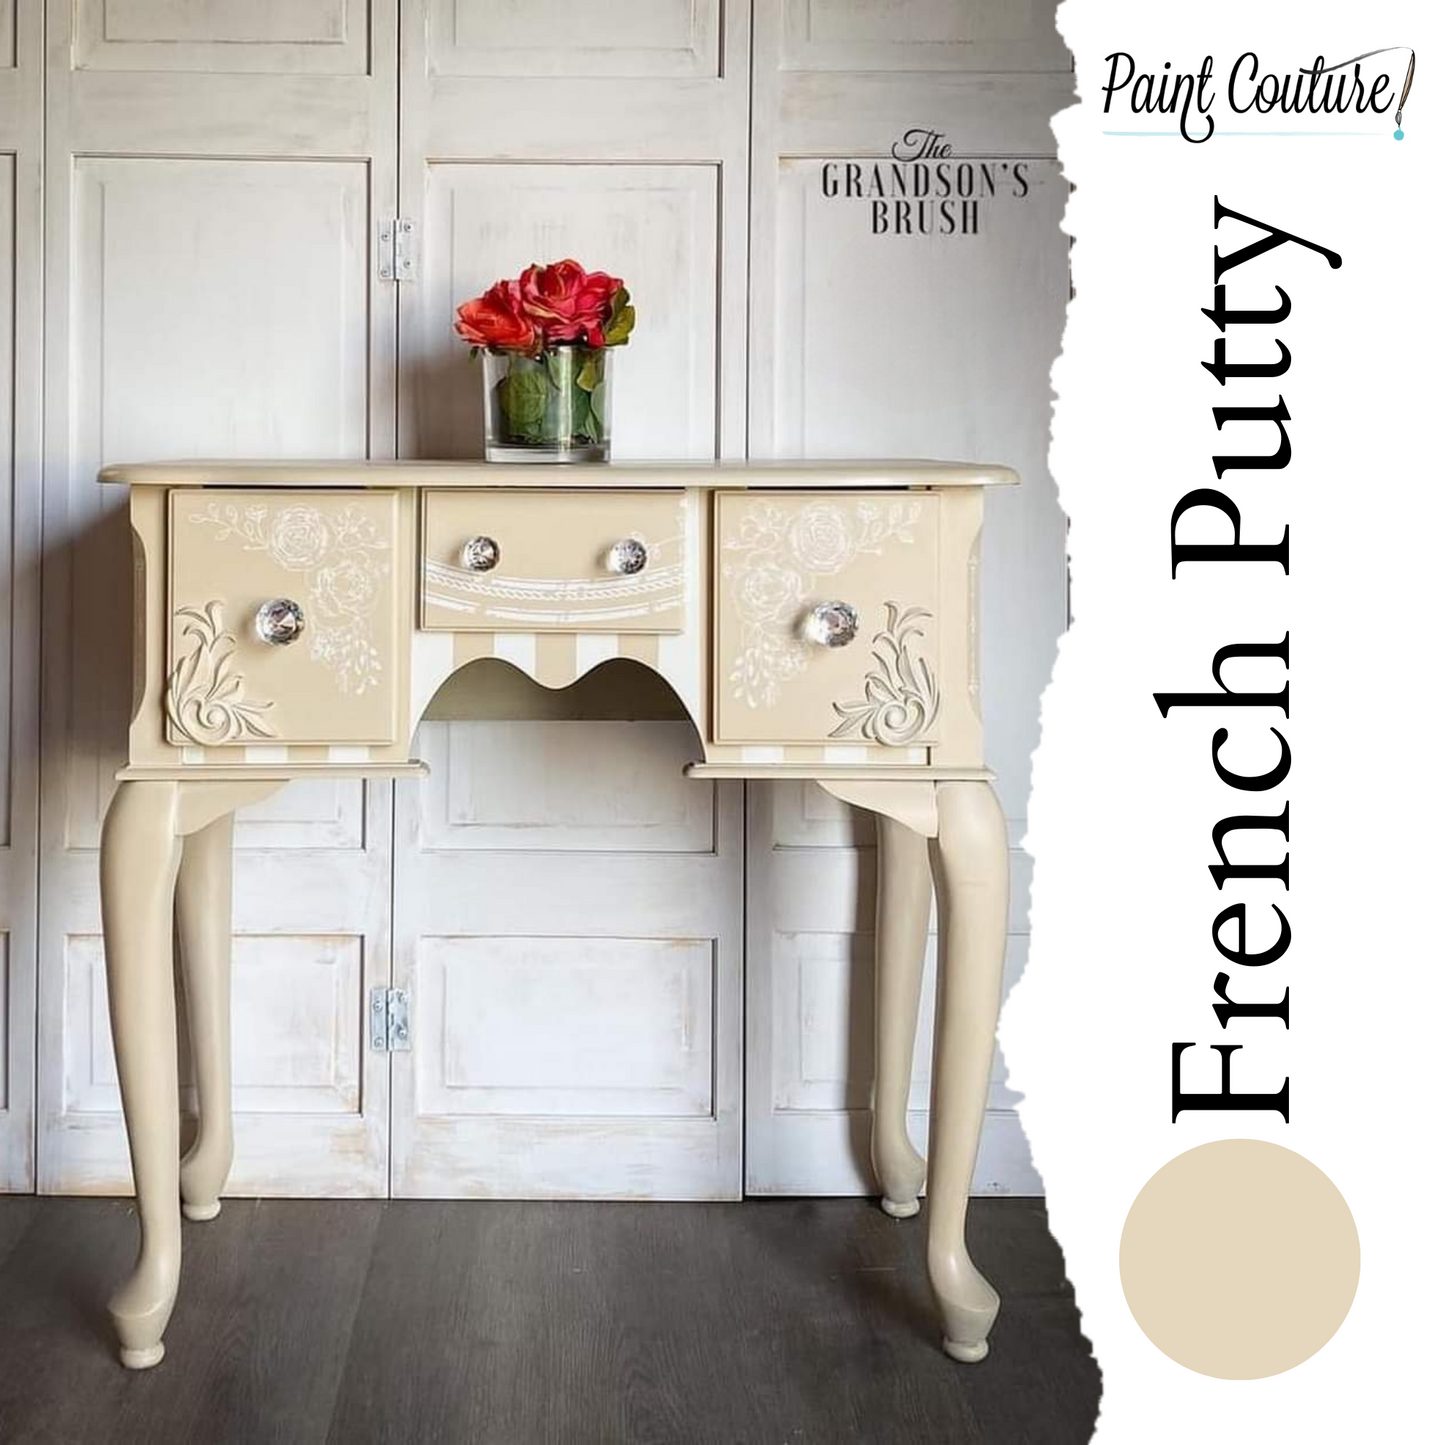 Paint Couture French Putty - Acrylic Mineral Paint with a Flat Finish!